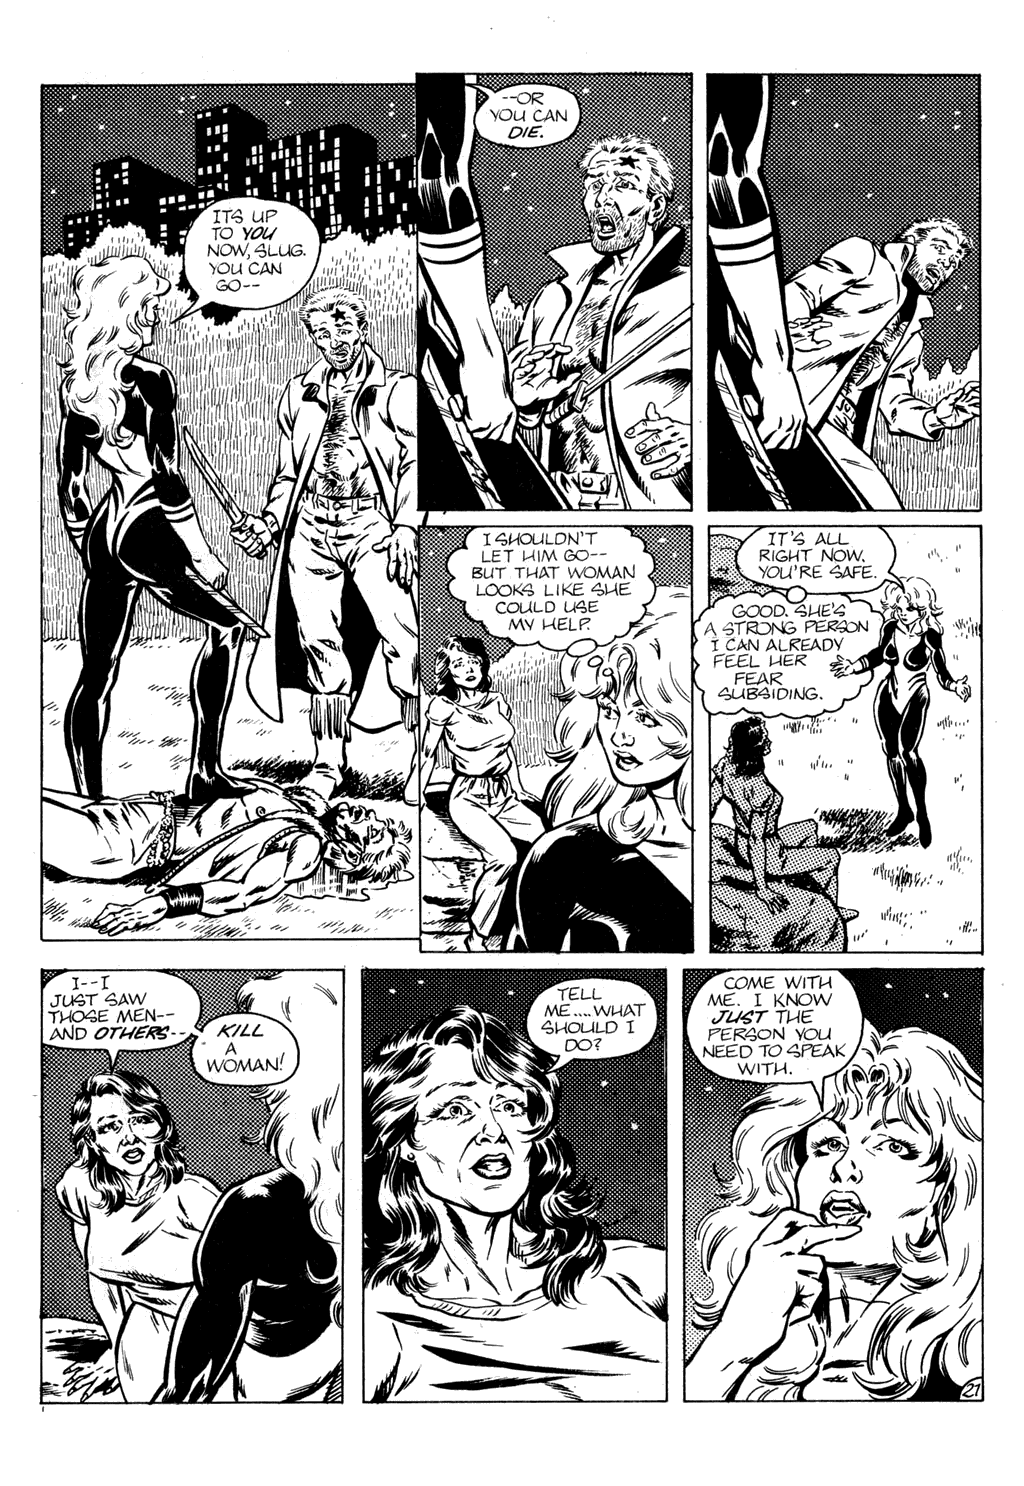 Scimidar Book IV: Wild Thing issue 1 - Page 22